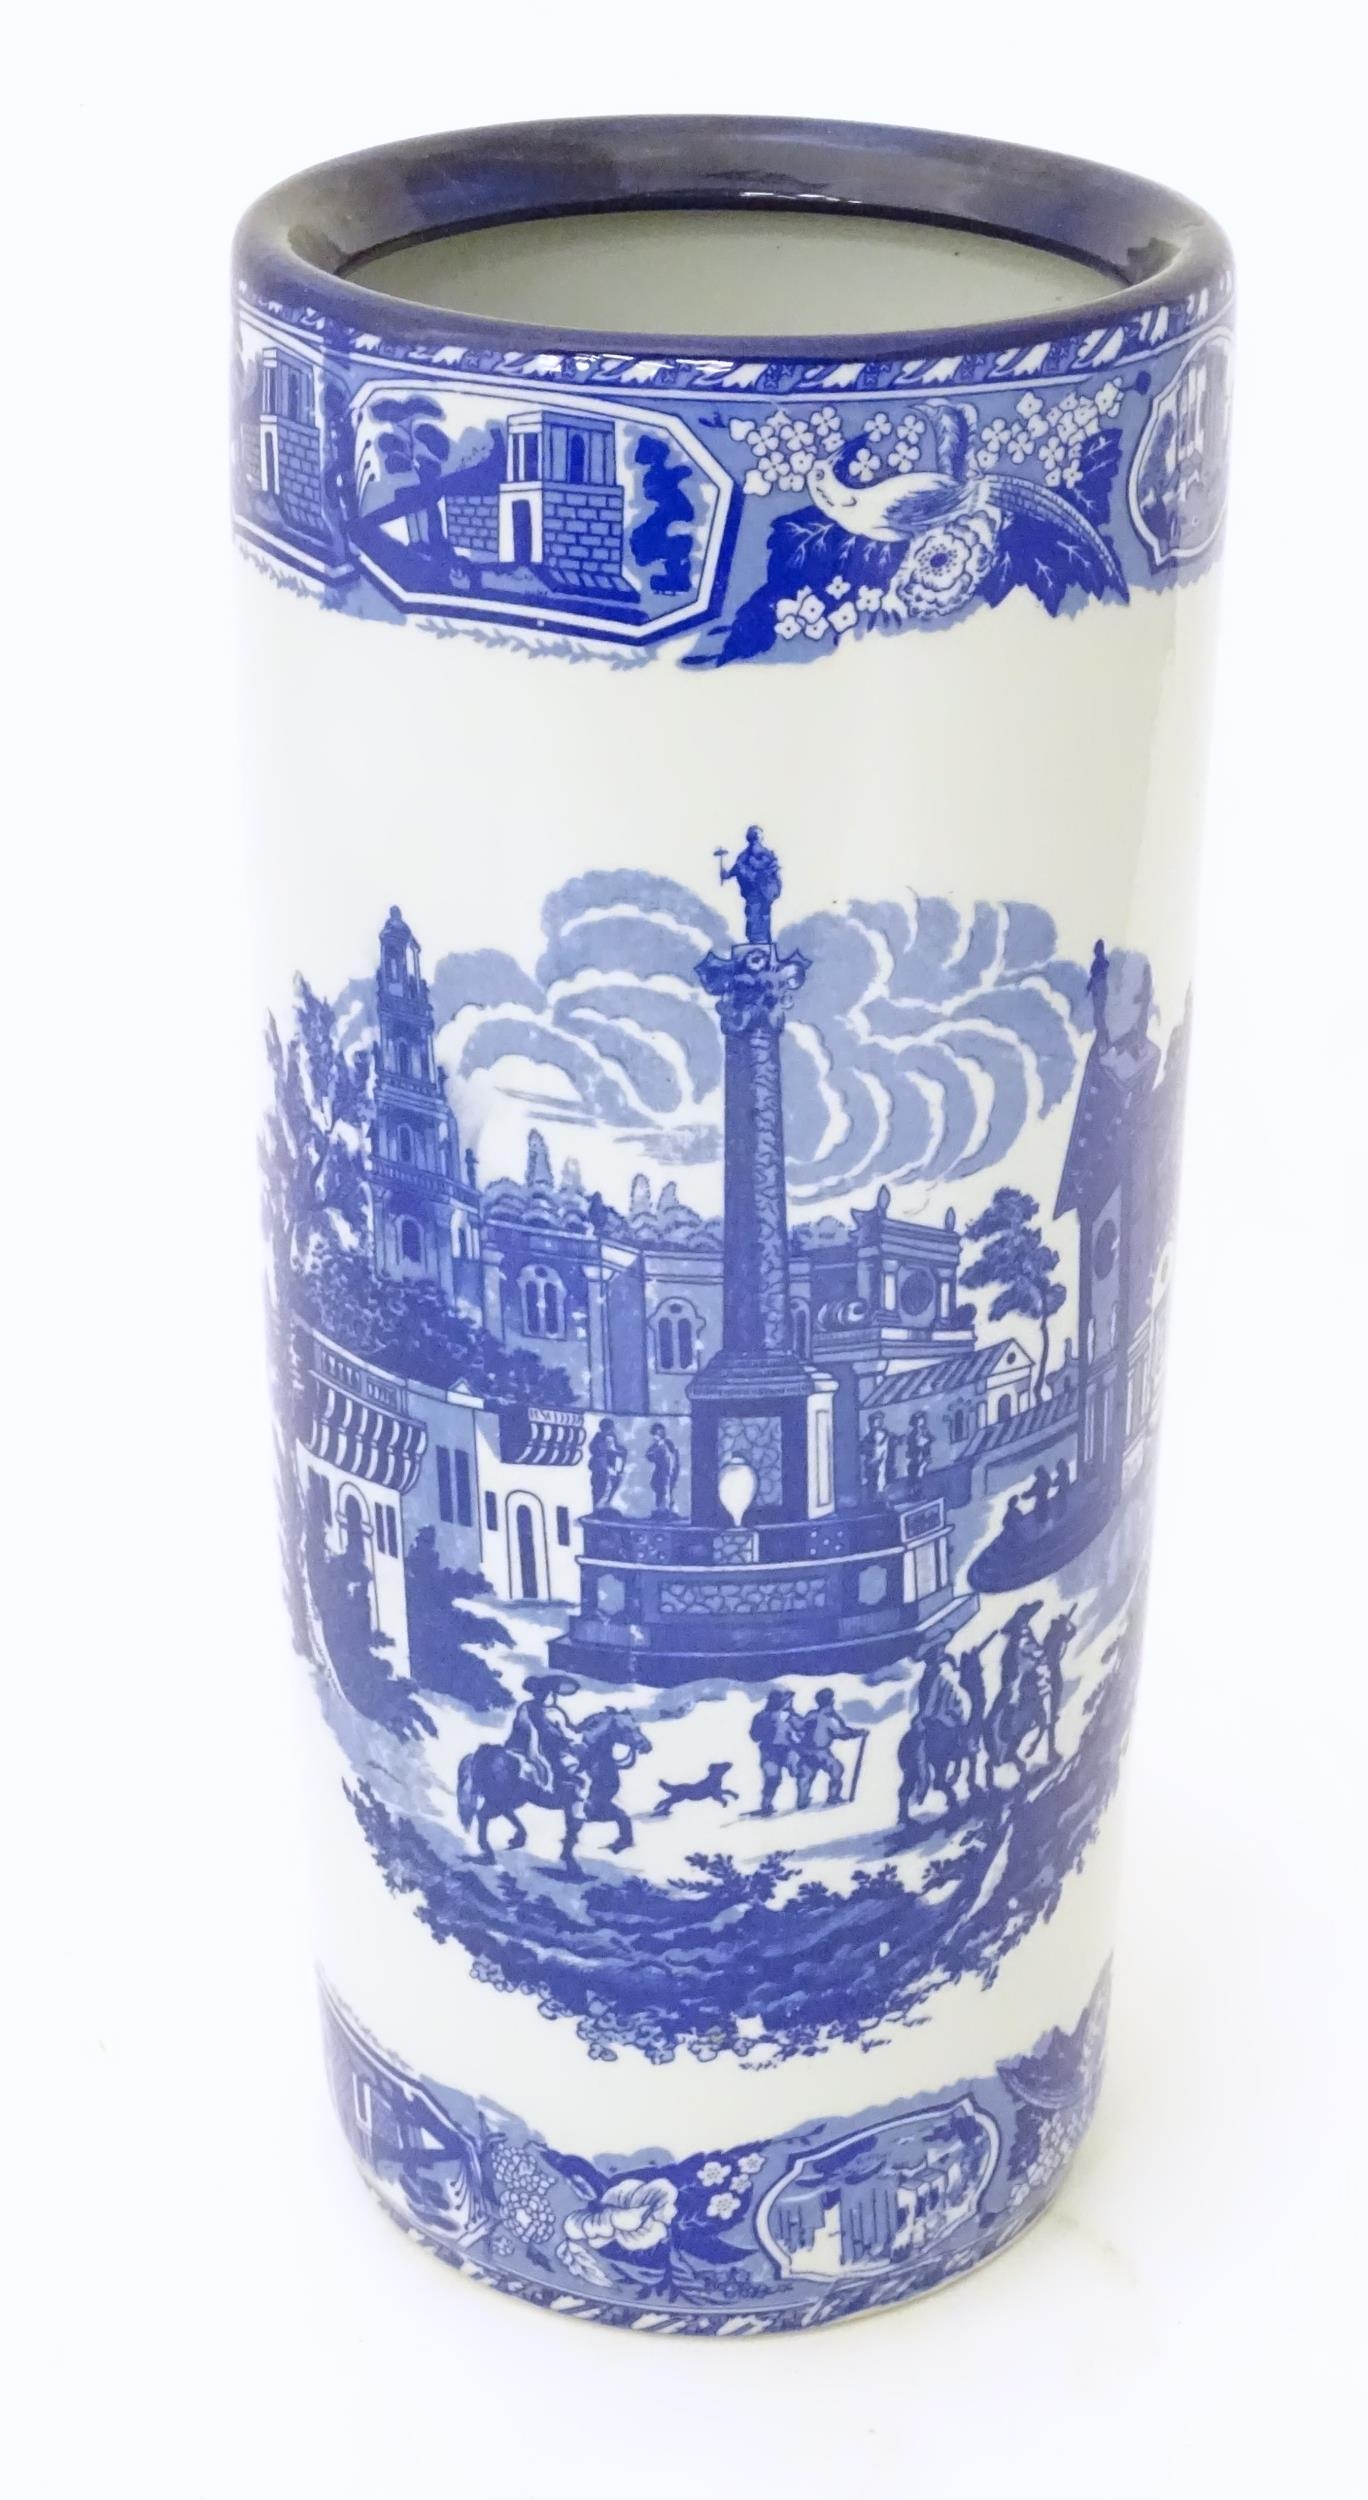 A Victoria Ware Ironstone blue and white stick / umbrella stand. Marked under. Approx 17 1/2" high